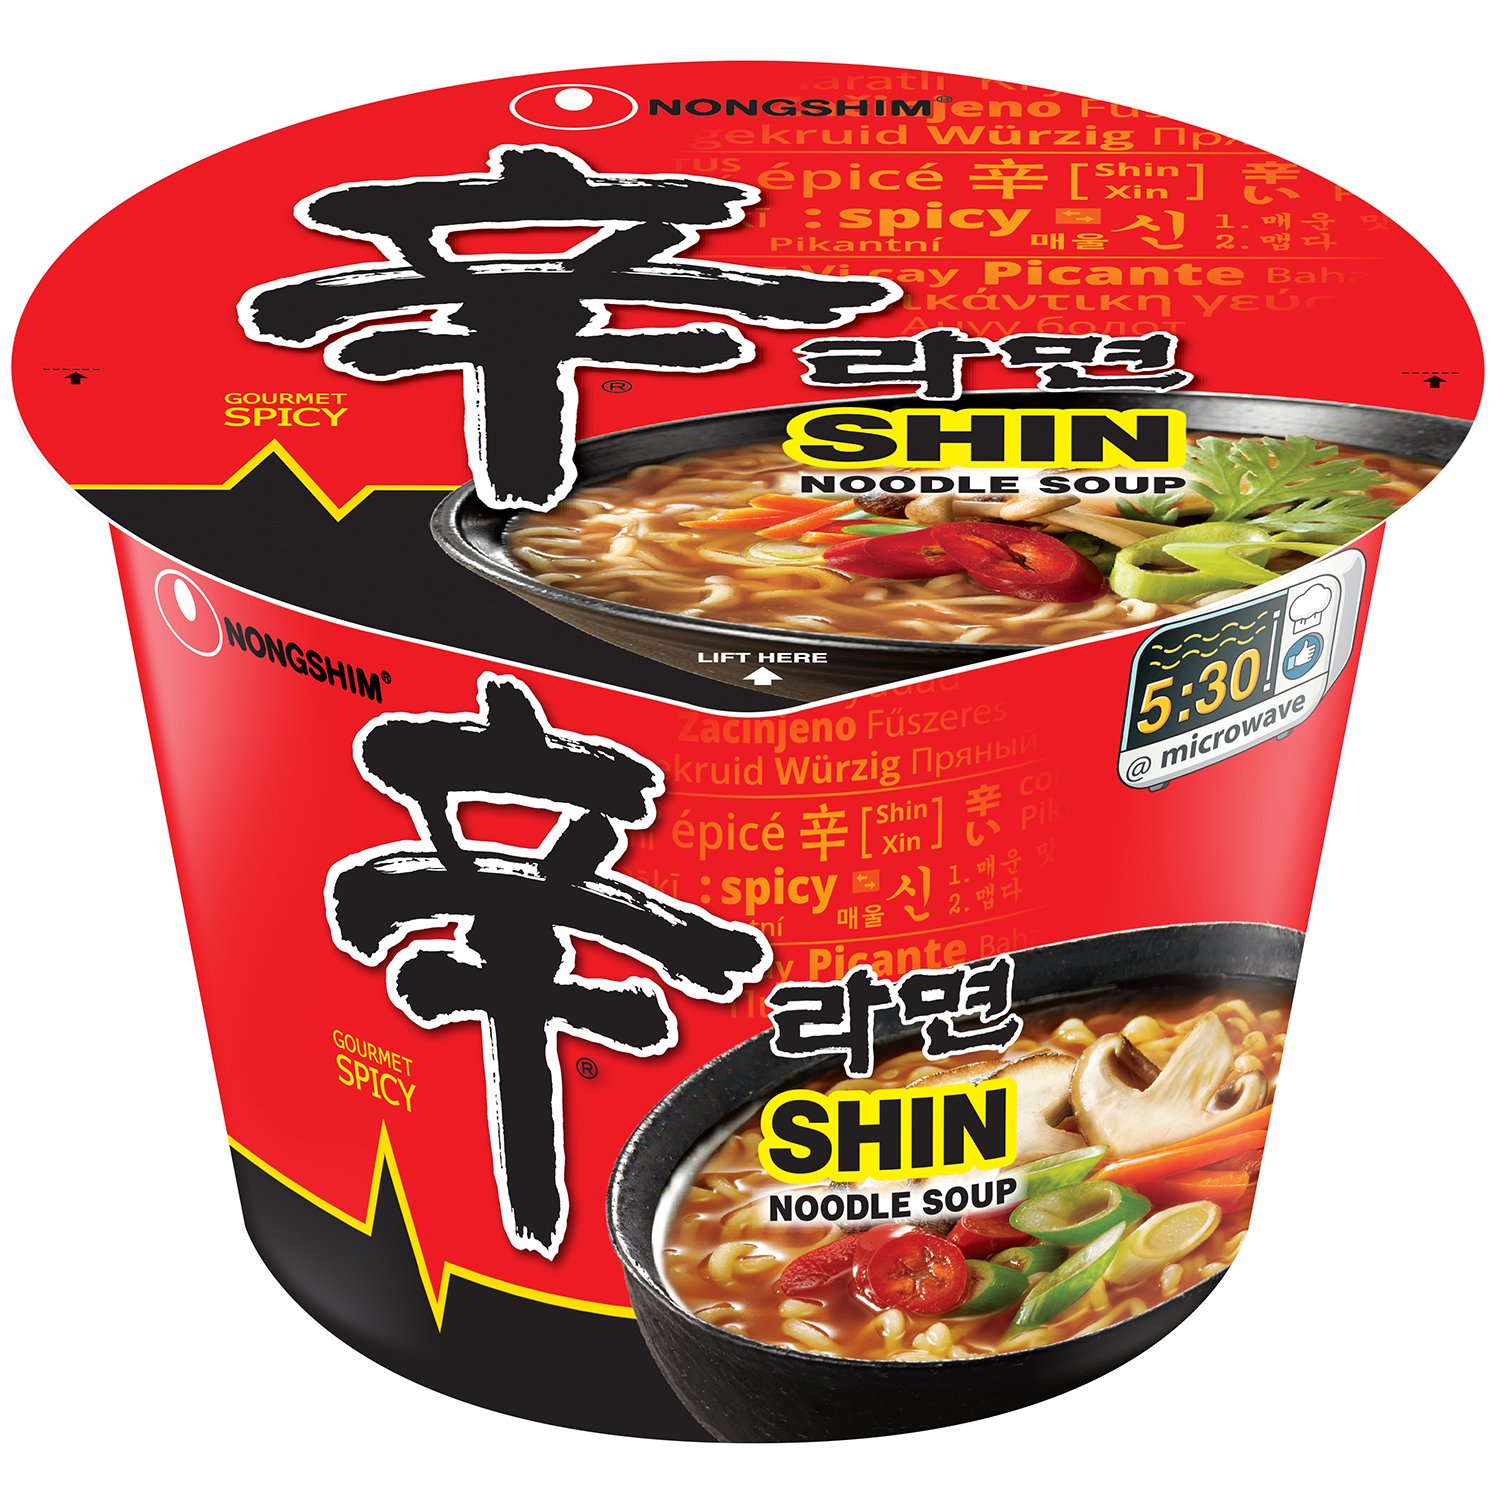 Nong Shim Shin Ramyun Noodle Soup (Hot And Spicy) 120G x 5 packs